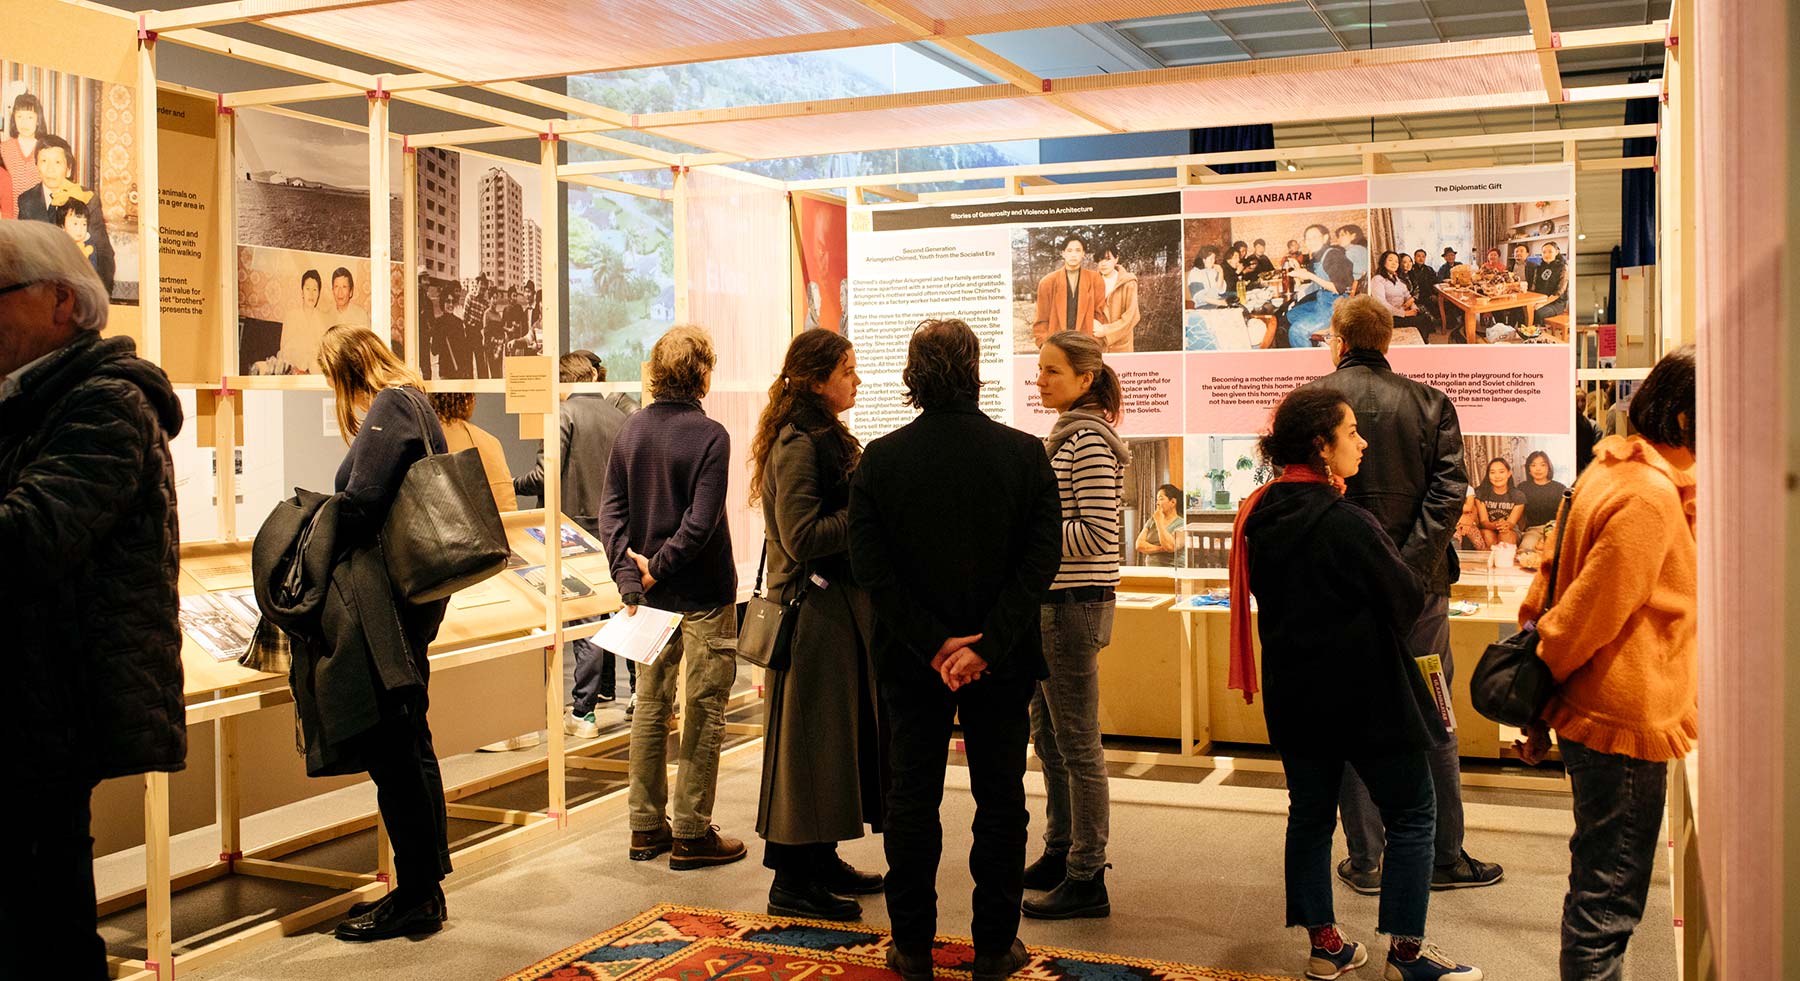 A group of people viewing and discussing an exhibit about The Gift: Stories of Generosity and Violence in Architecture